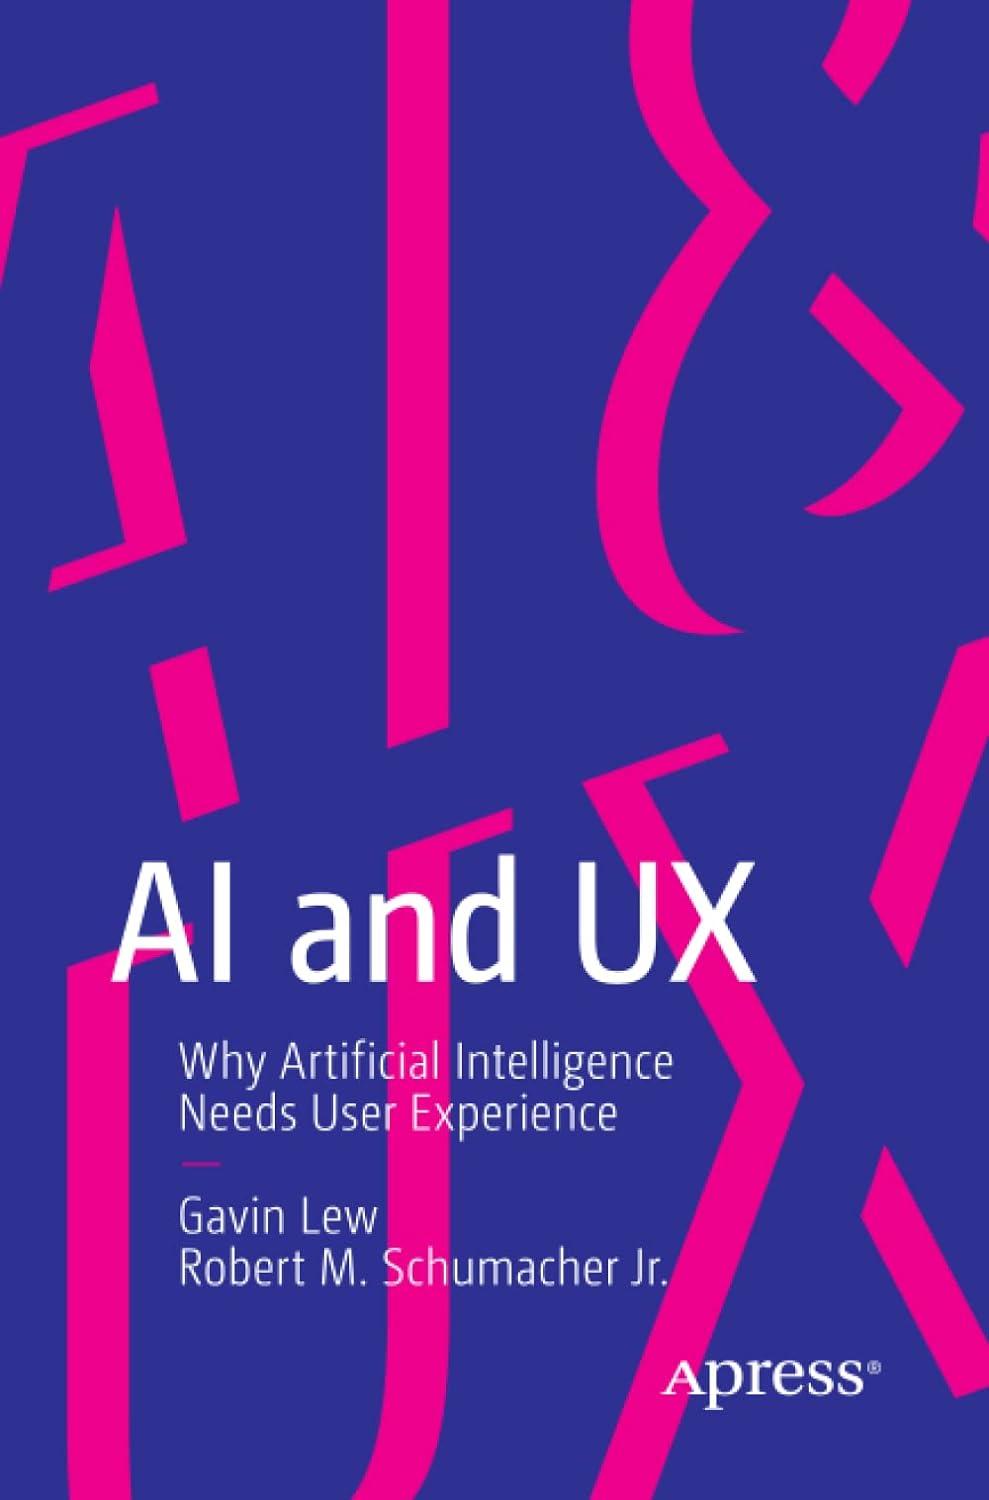 ai and ux why artificial intelligence needs user experience 1st edition gavin lew , robert m. schumacher jr.